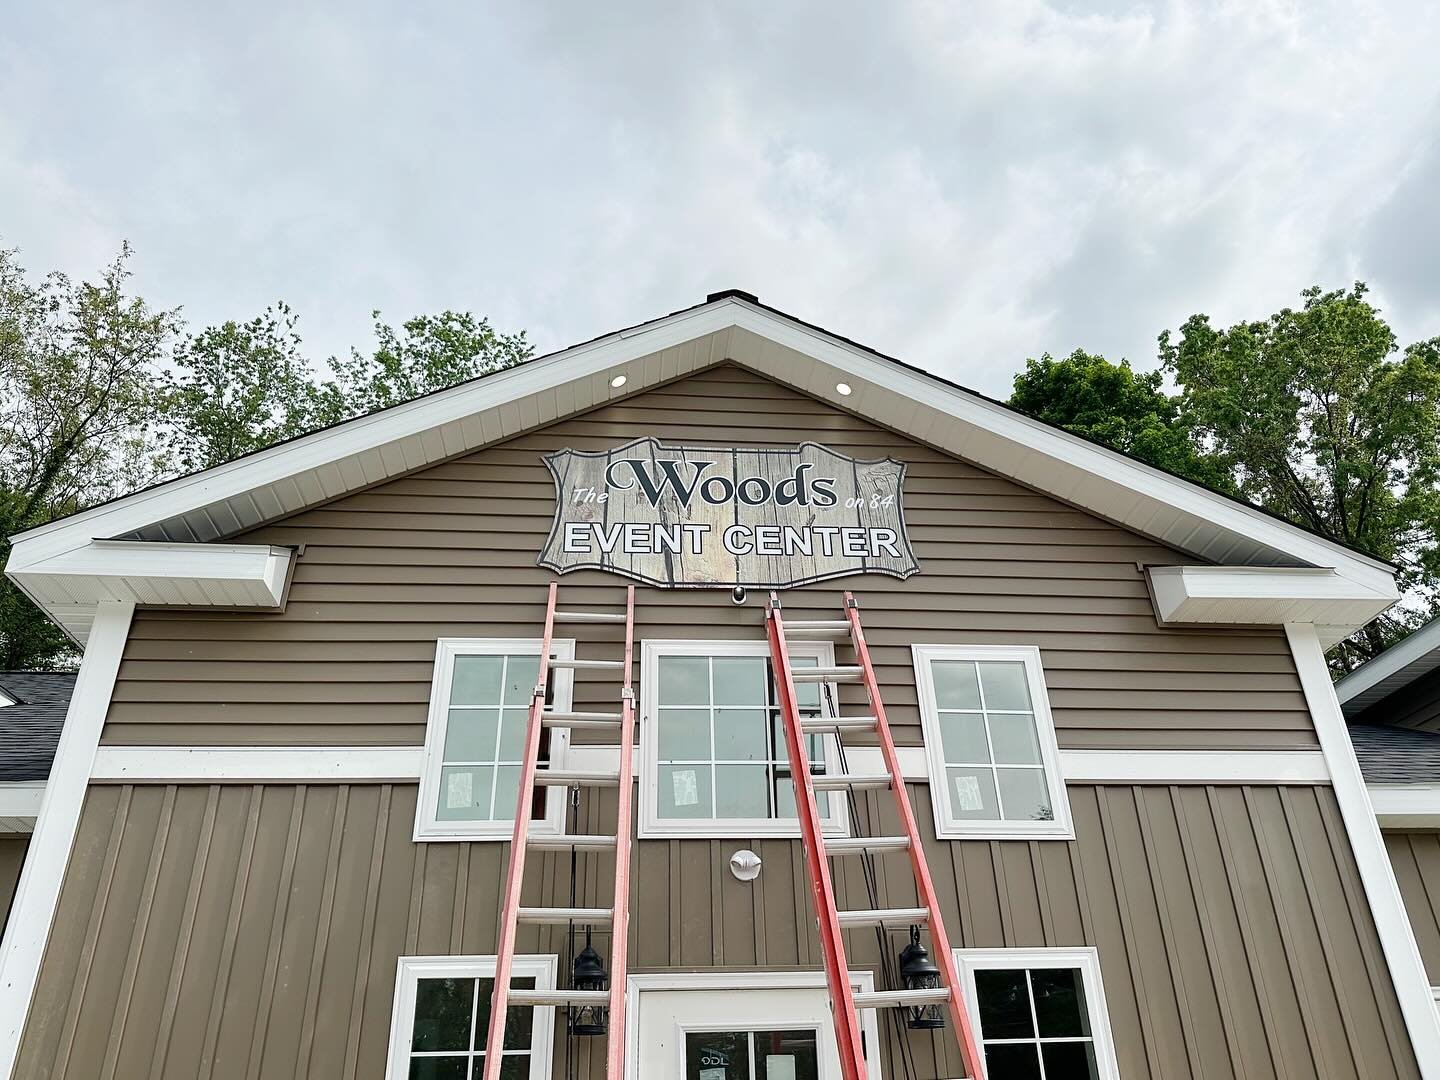 Working on some finishing touches before the grand opening at The Woods on 84! 

Stay posted for more videos and photos of this beautiful new event center in our neighborhood! 

If you&rsquo;re looking to build or renovate commercial or residential b